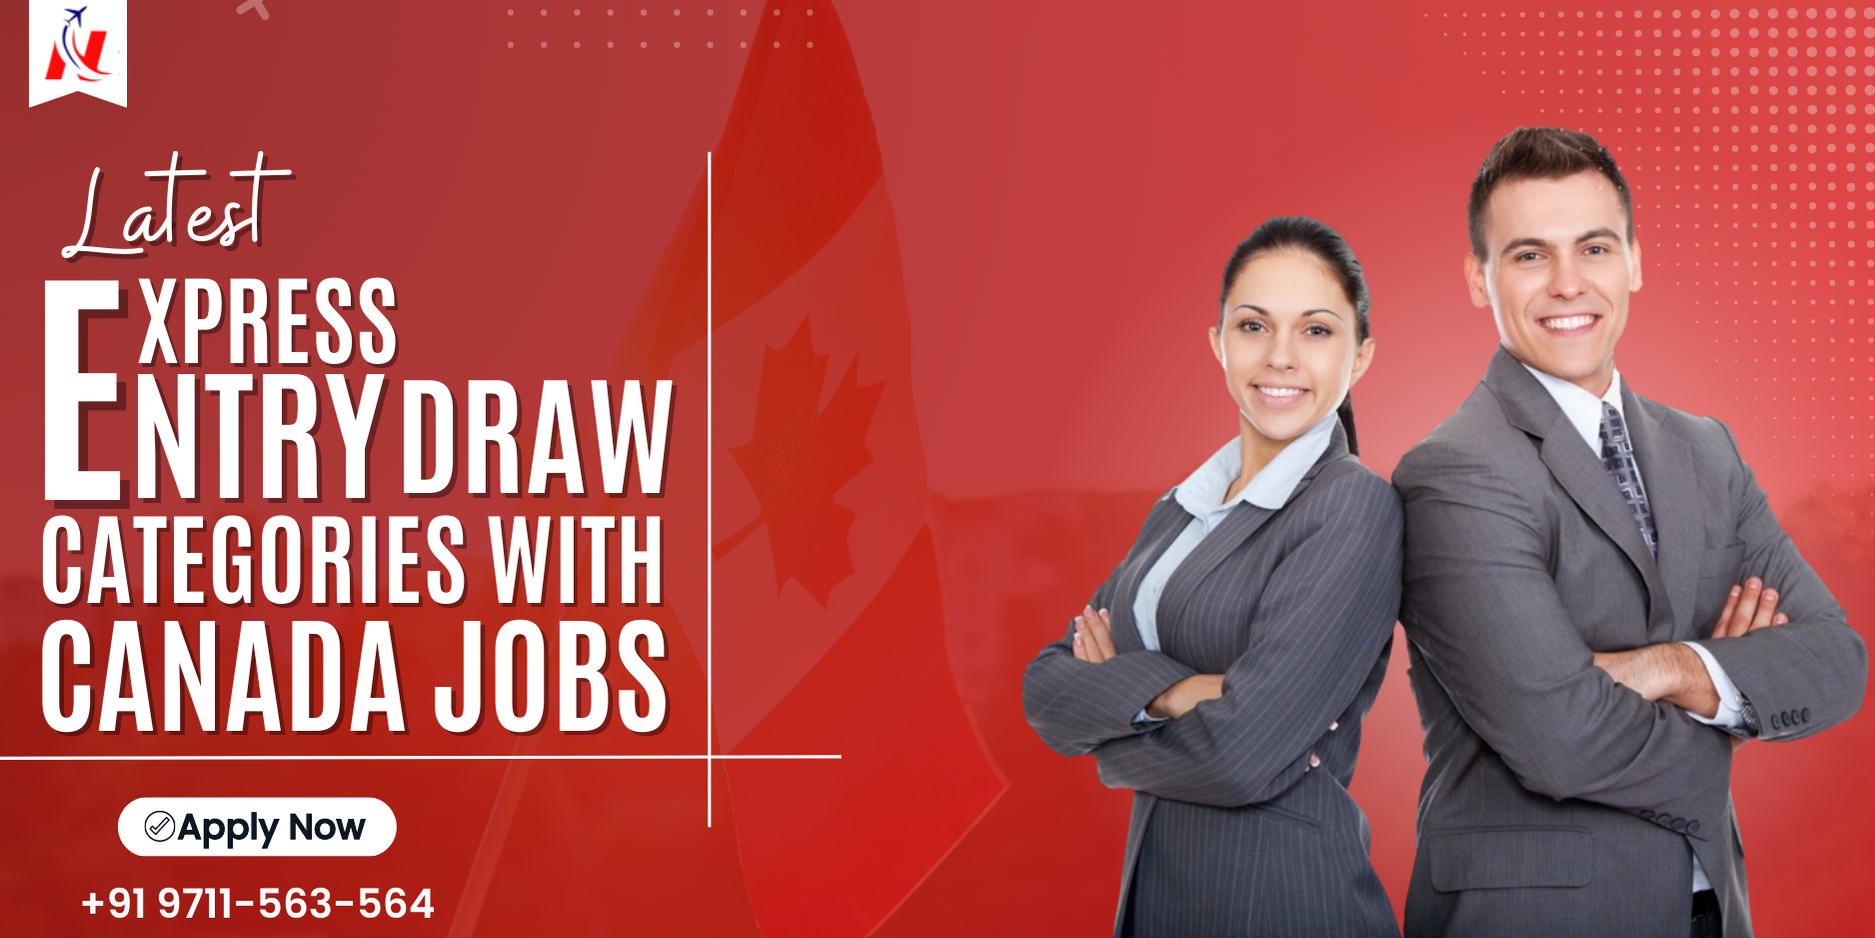 Latest Express Entry draw categories with Canada Jobs